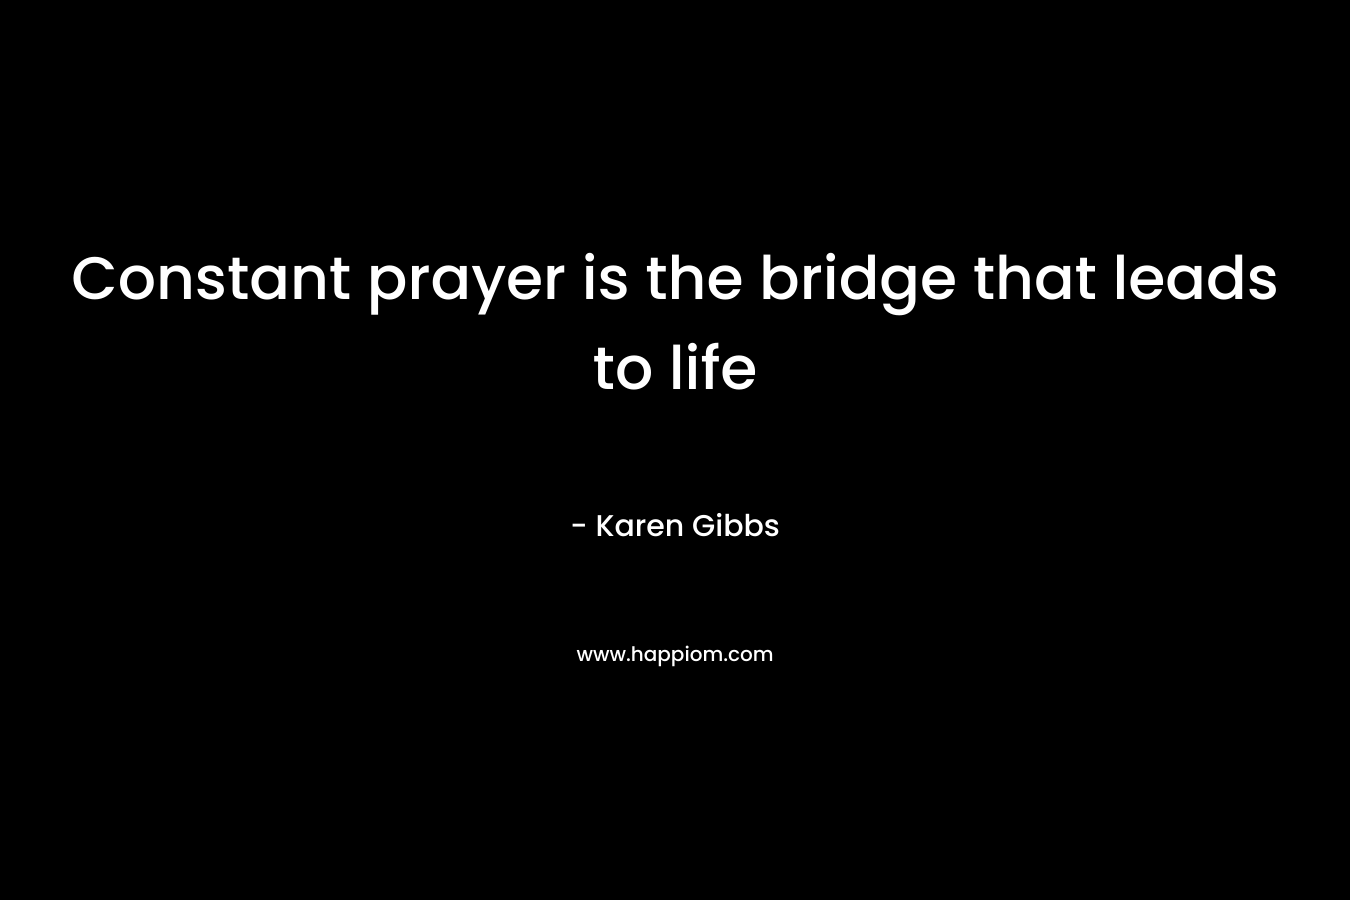 Constant prayer is the bridge that leads to life